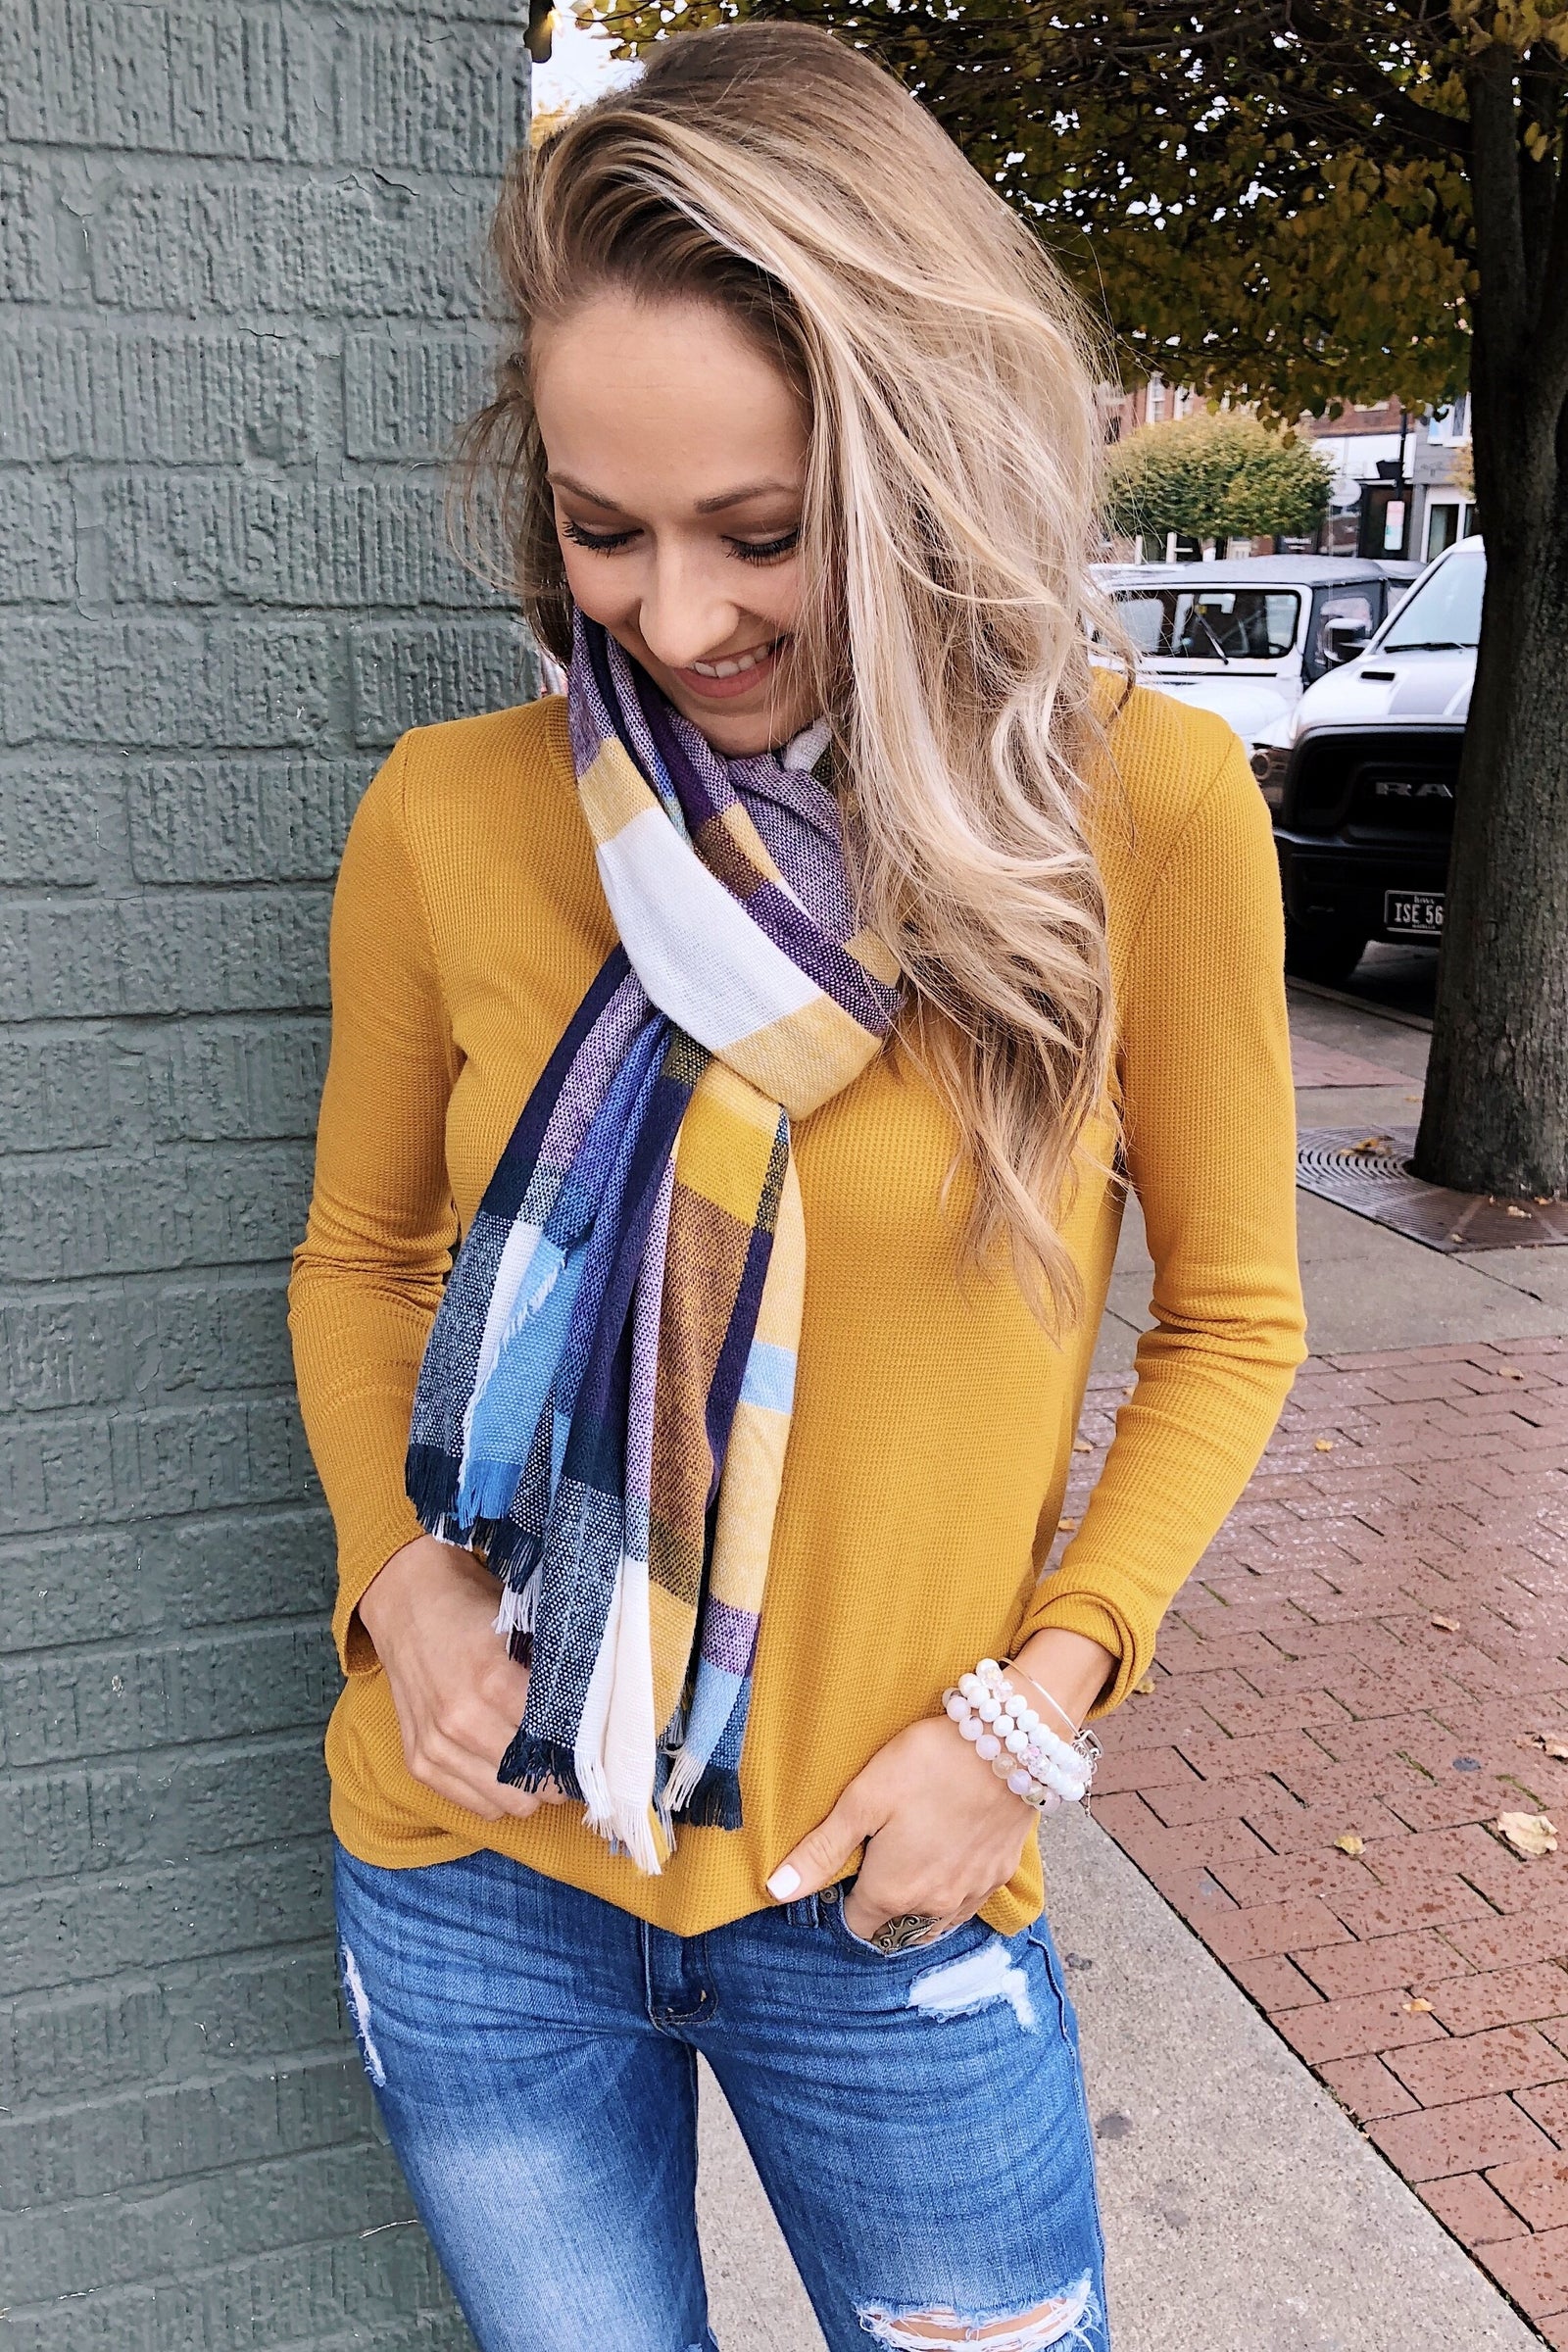 The Best I Can Long Sleeve Top- Mustard